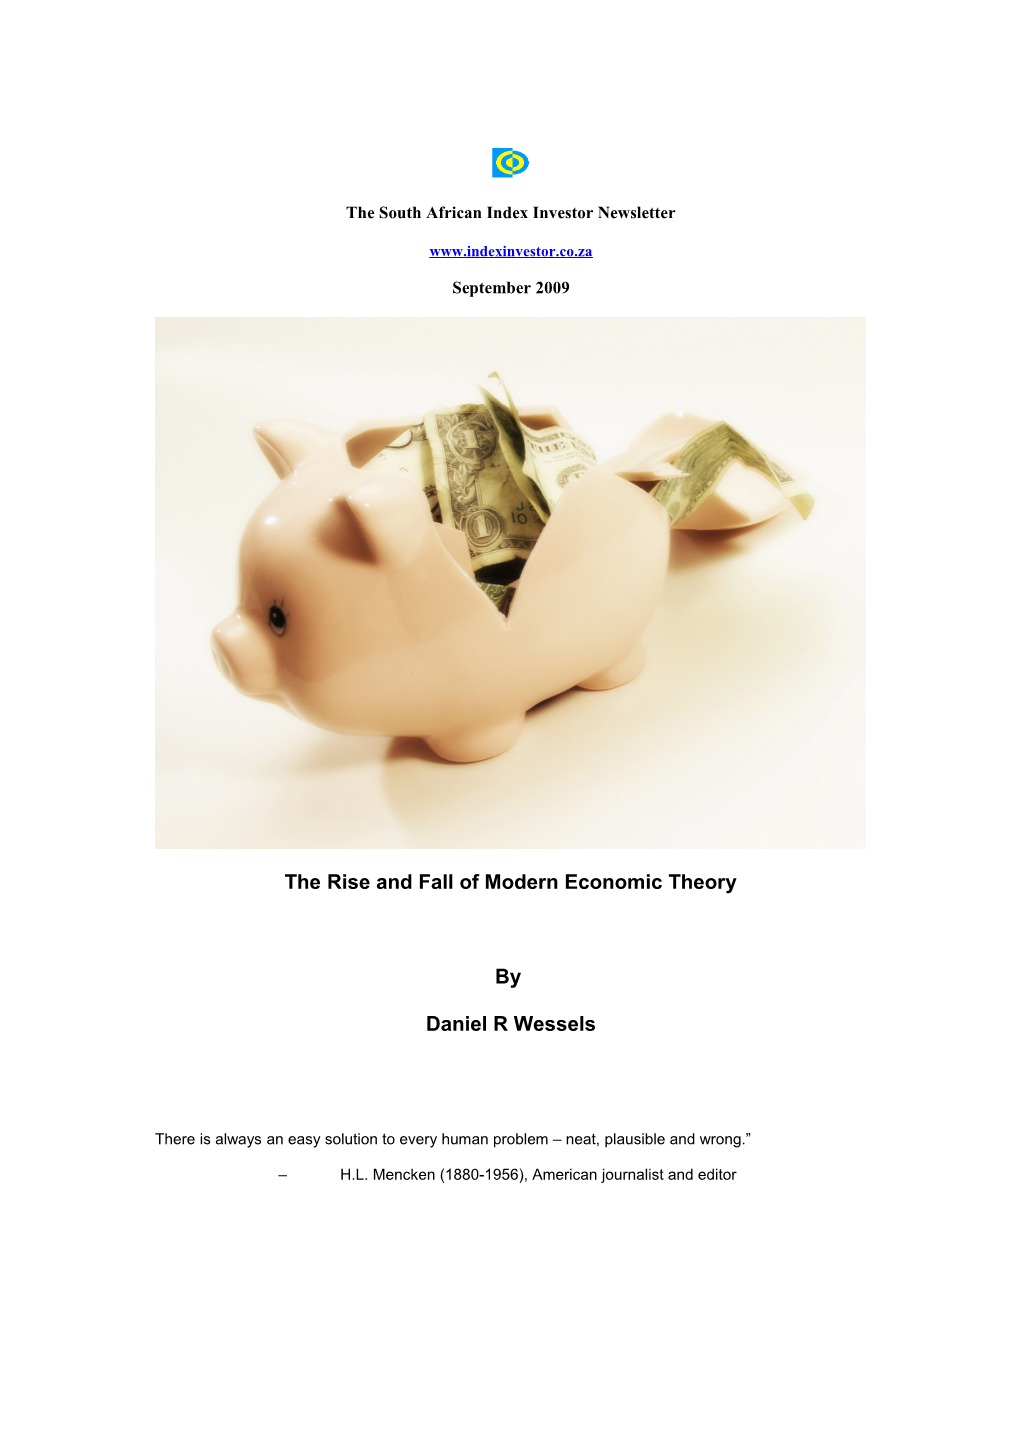 The South African Index Investor Newsletter s1